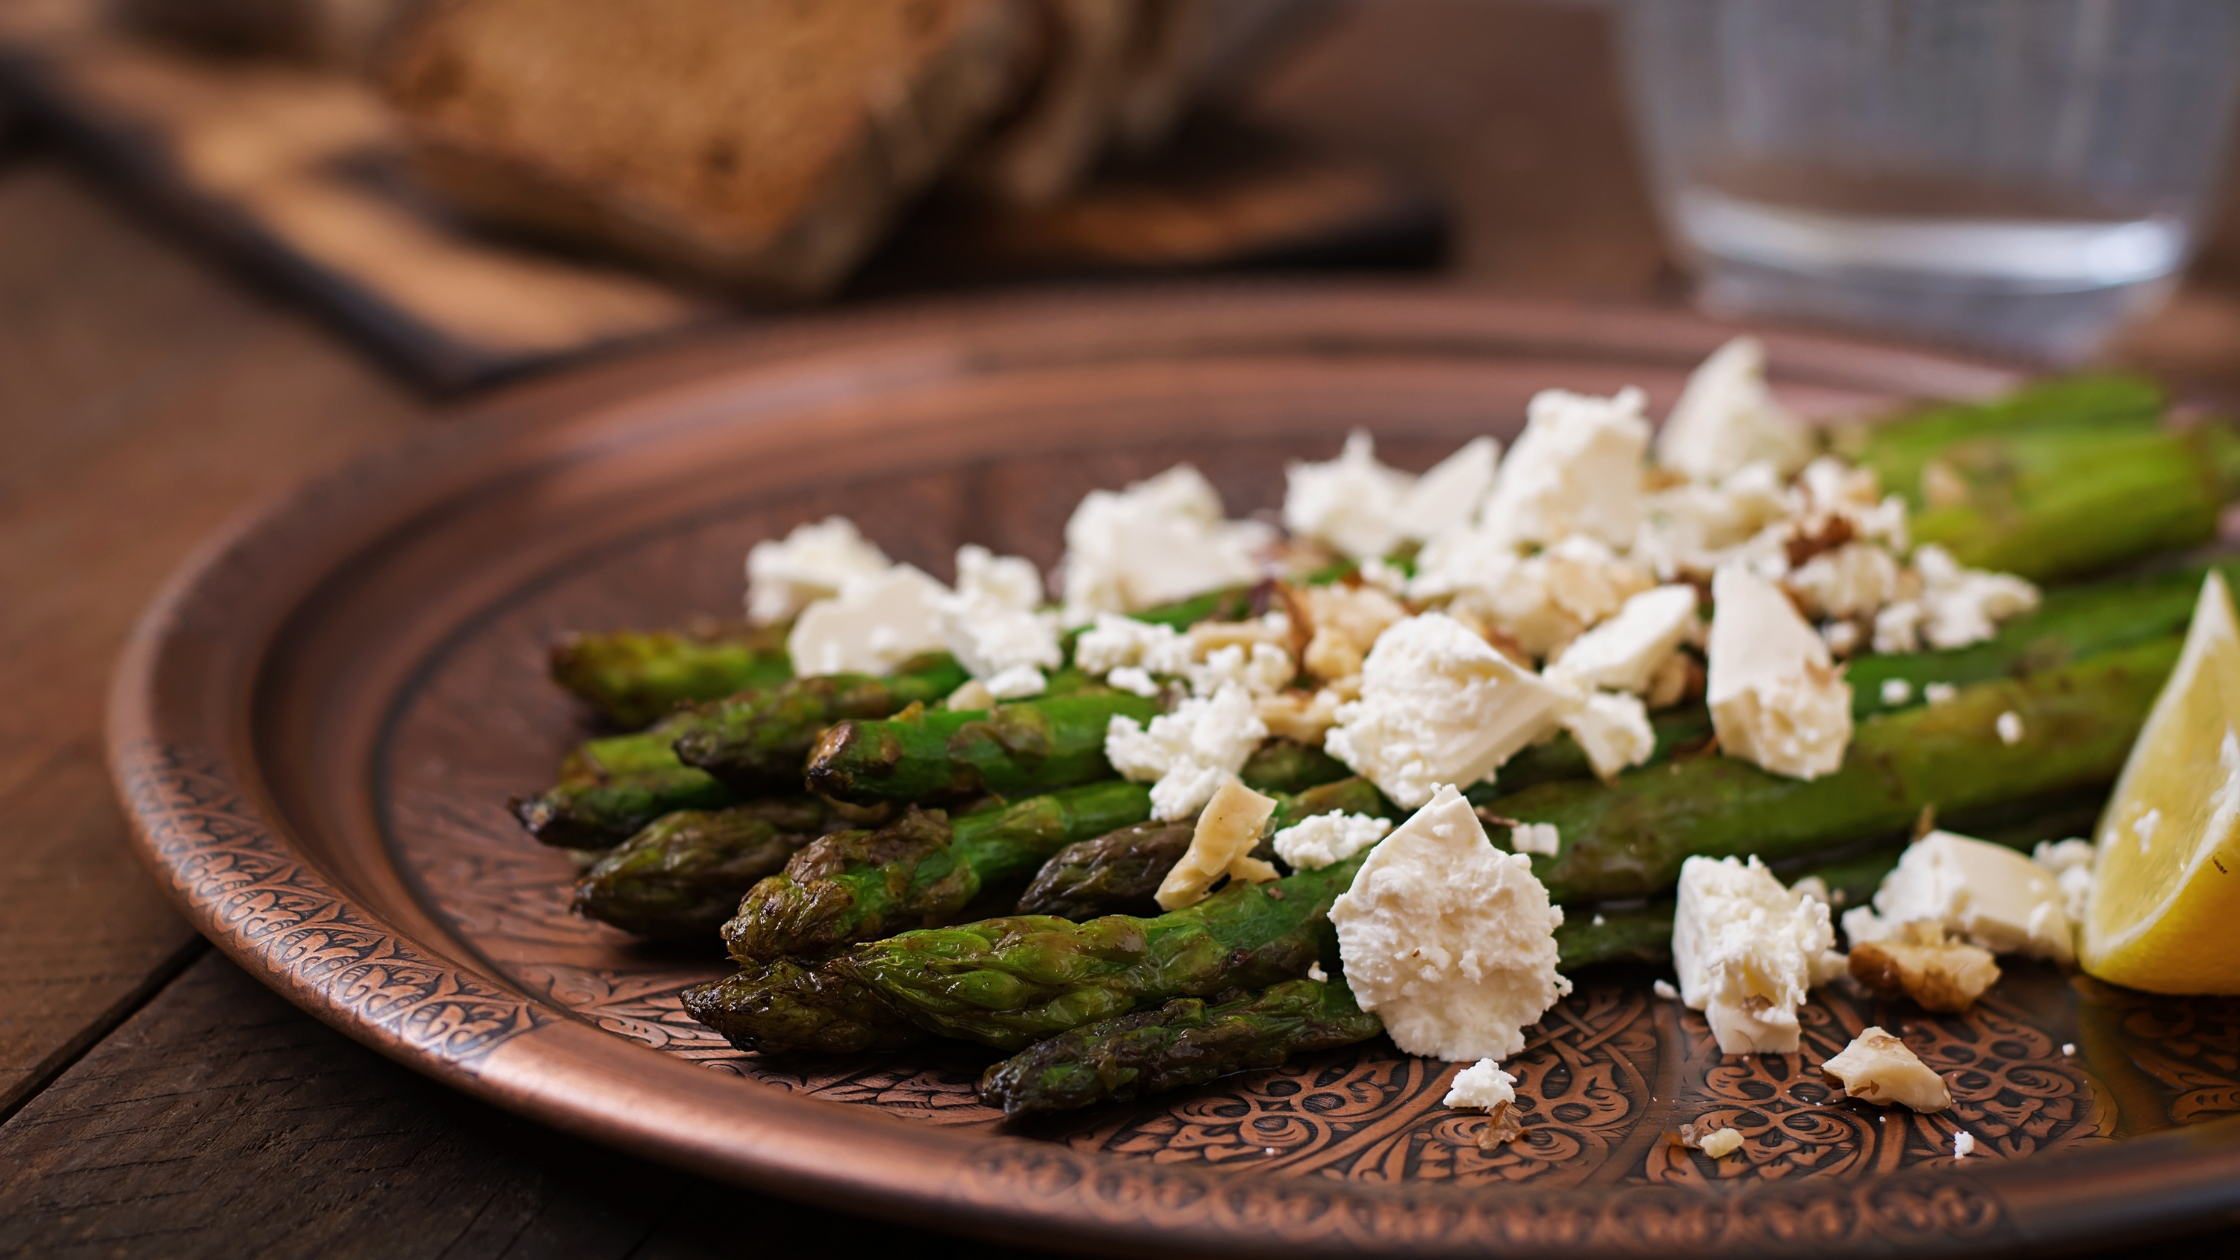 Brown gold plate of barbecued asparagus with feta and lemon